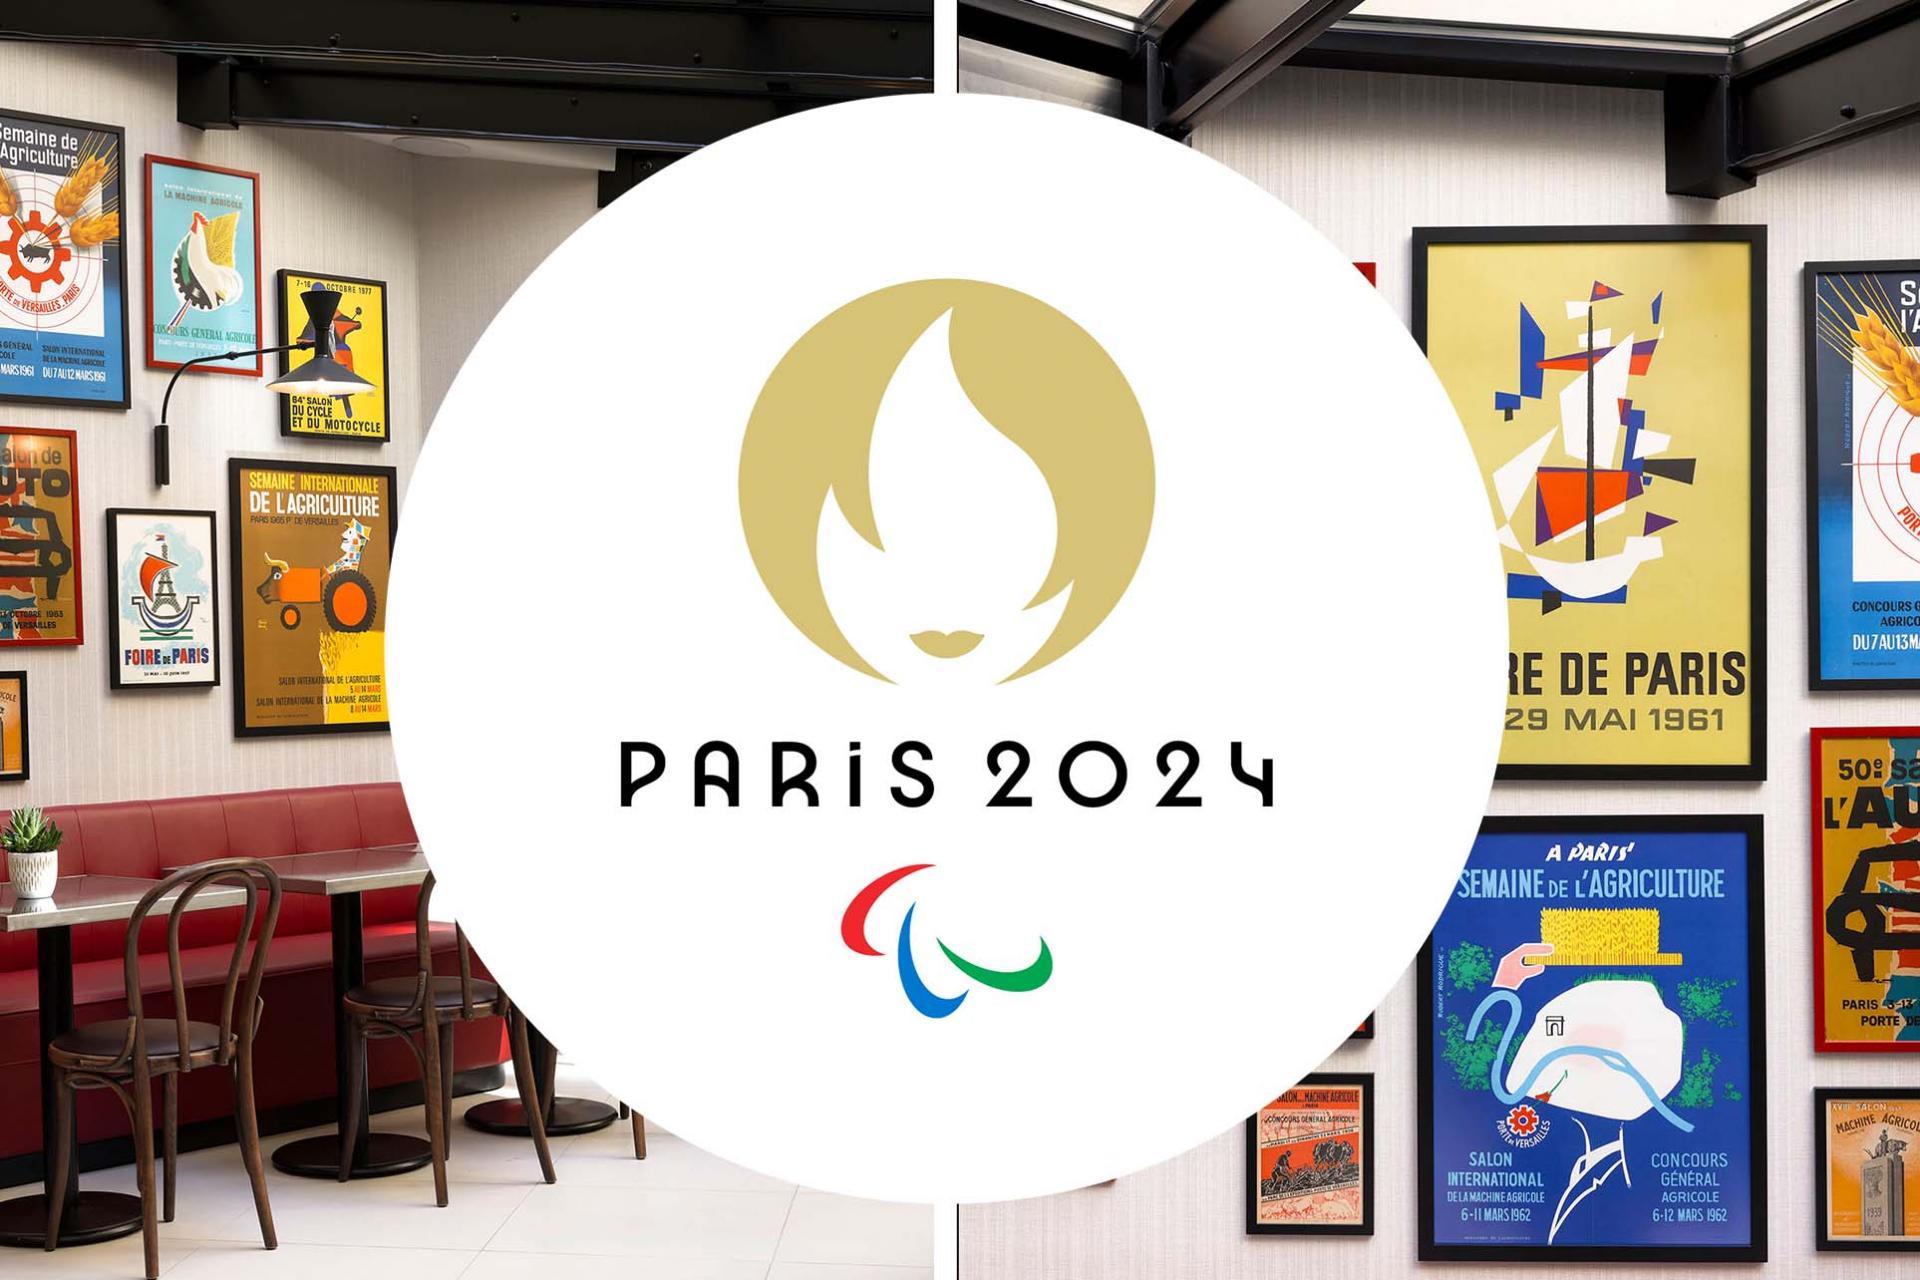 Hotel Paris Olympics 2024 : Experience an exceptional stay during the Paris 2024 Olympics at the Modernist Hotel